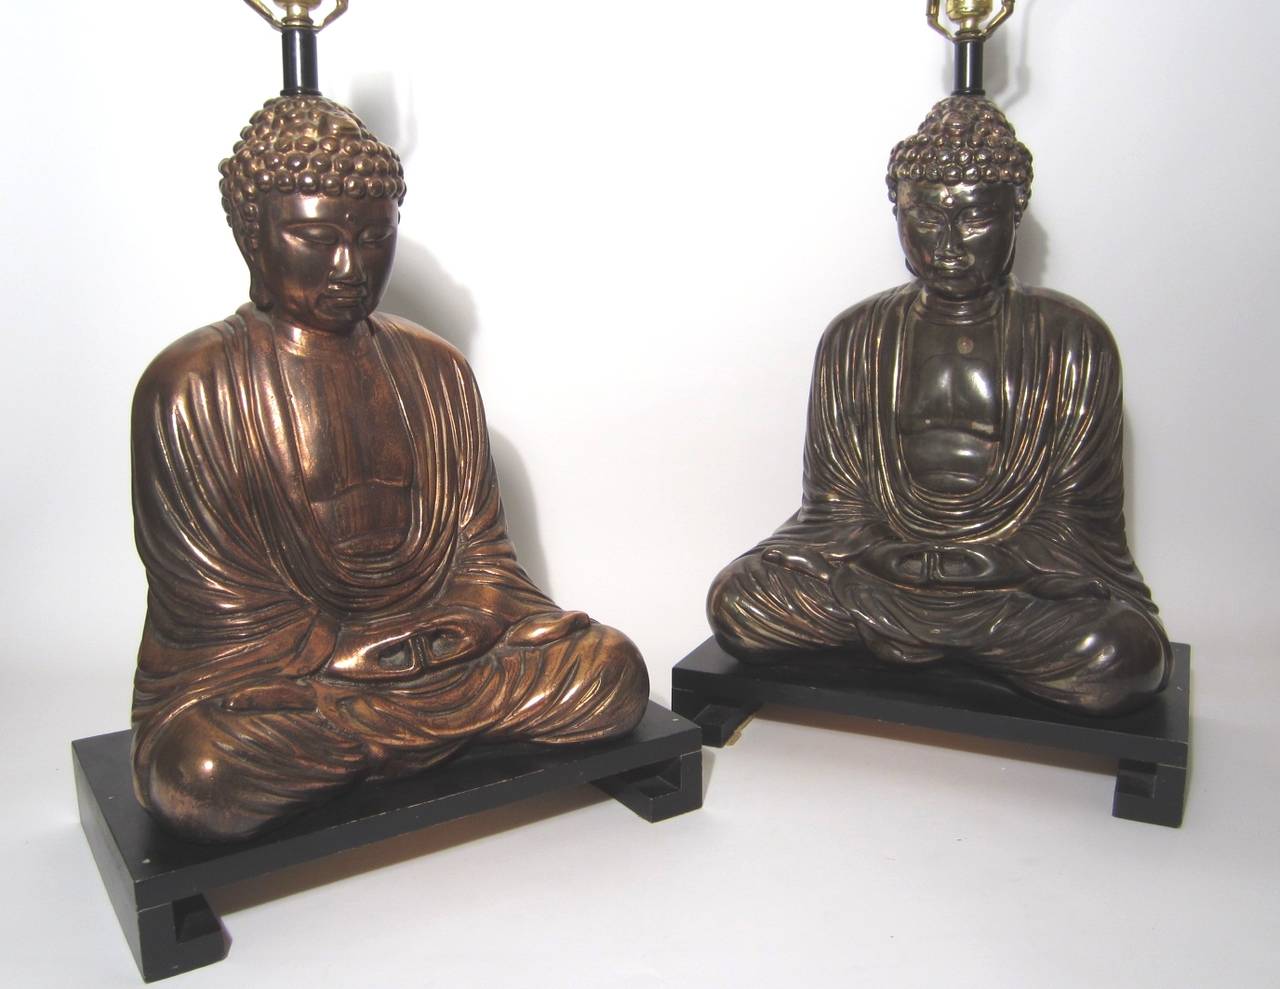 Incredible pair of vintage lamp, circa 1950s.
Polychromatic finish, one aged copper the other tarnished silver.
They are large, heavy lamps on ebonized wood base's.
Each has original cloth covered shades in perfect condition.
 